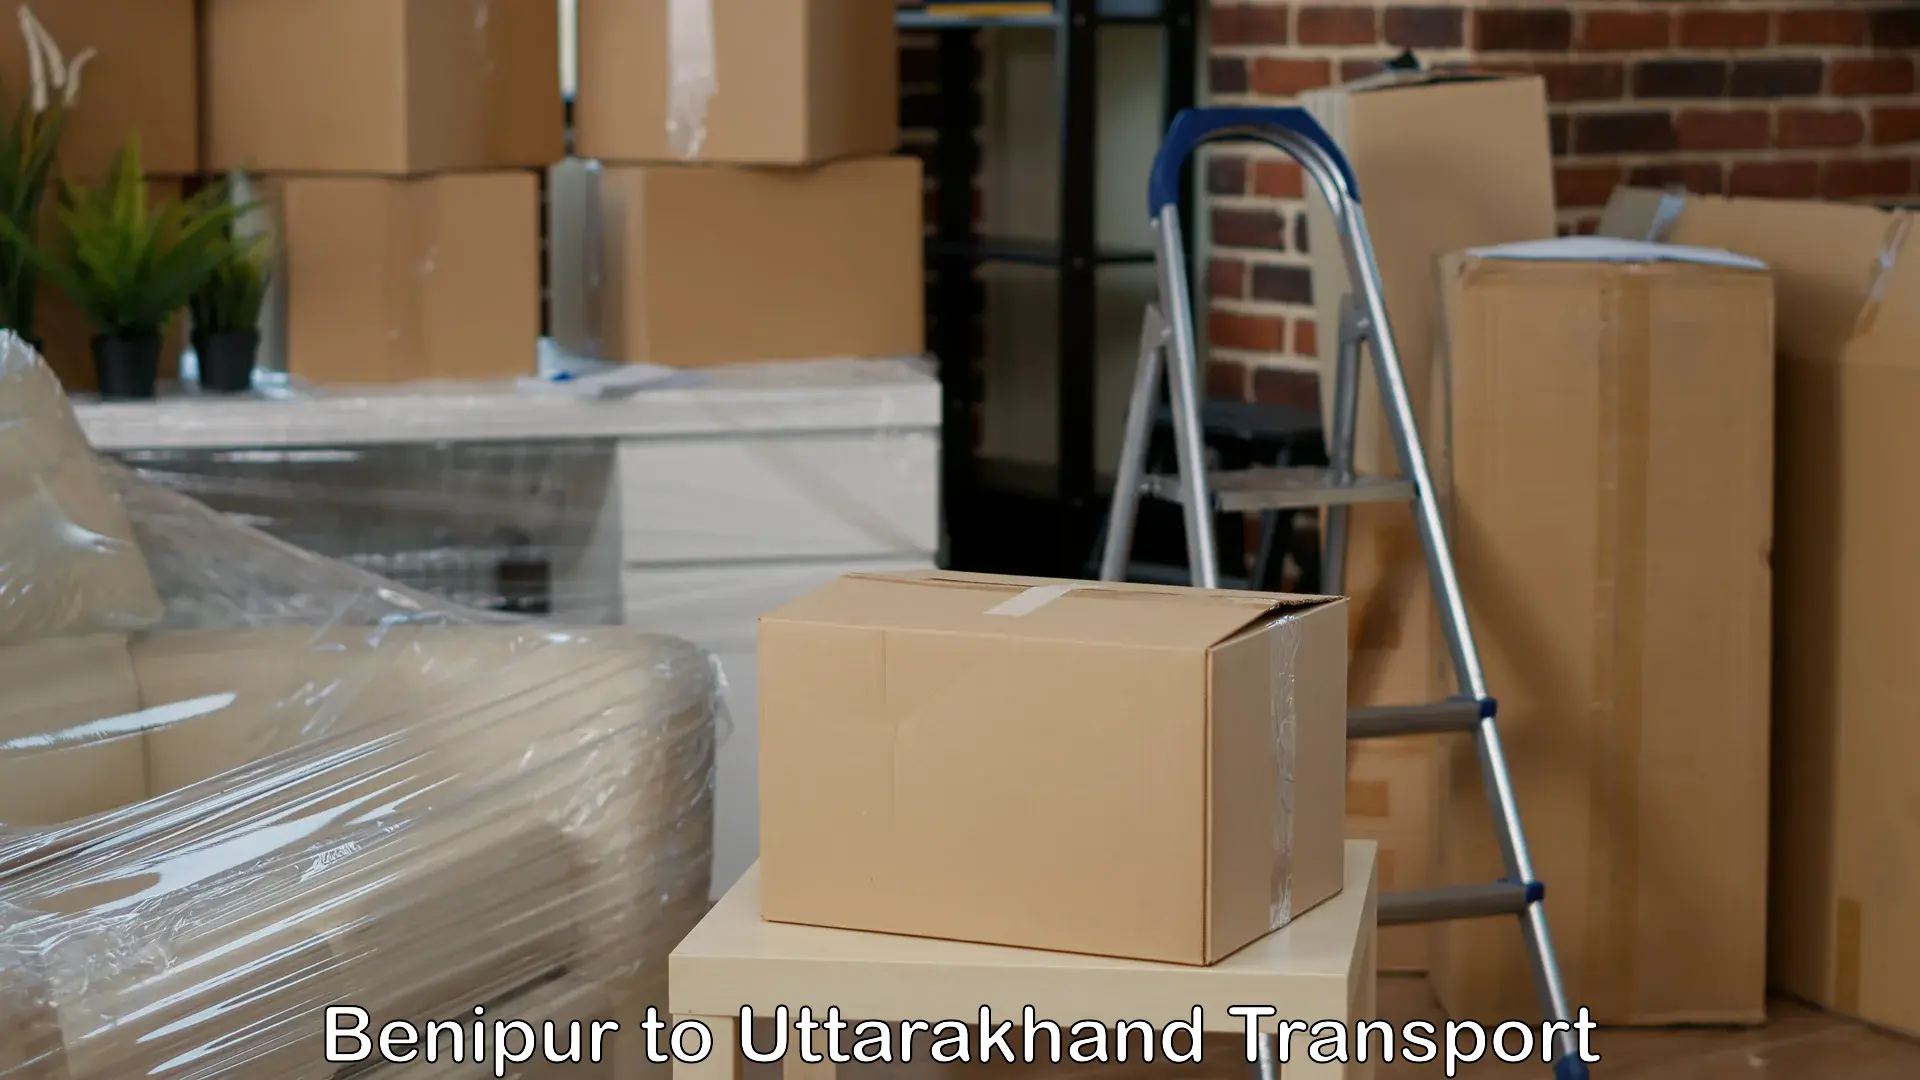 Truck transport companies in India Benipur to G B Pant Universtiy of Agriculture and Technology Pantnagar